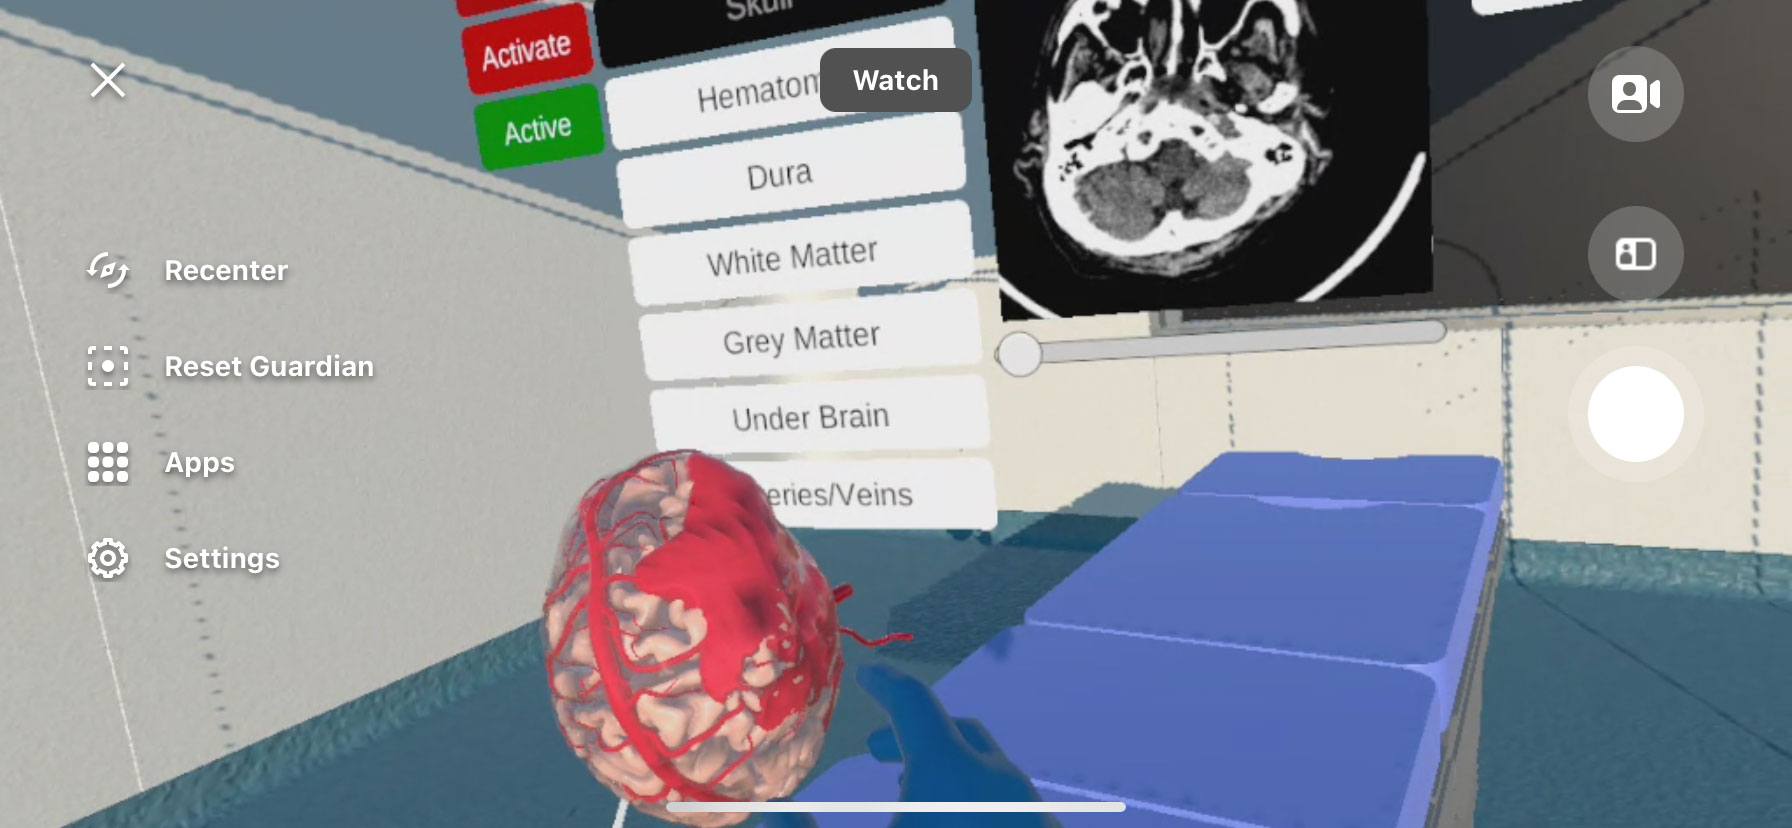 A screen shot from a virtual reality system for neurosurgery education